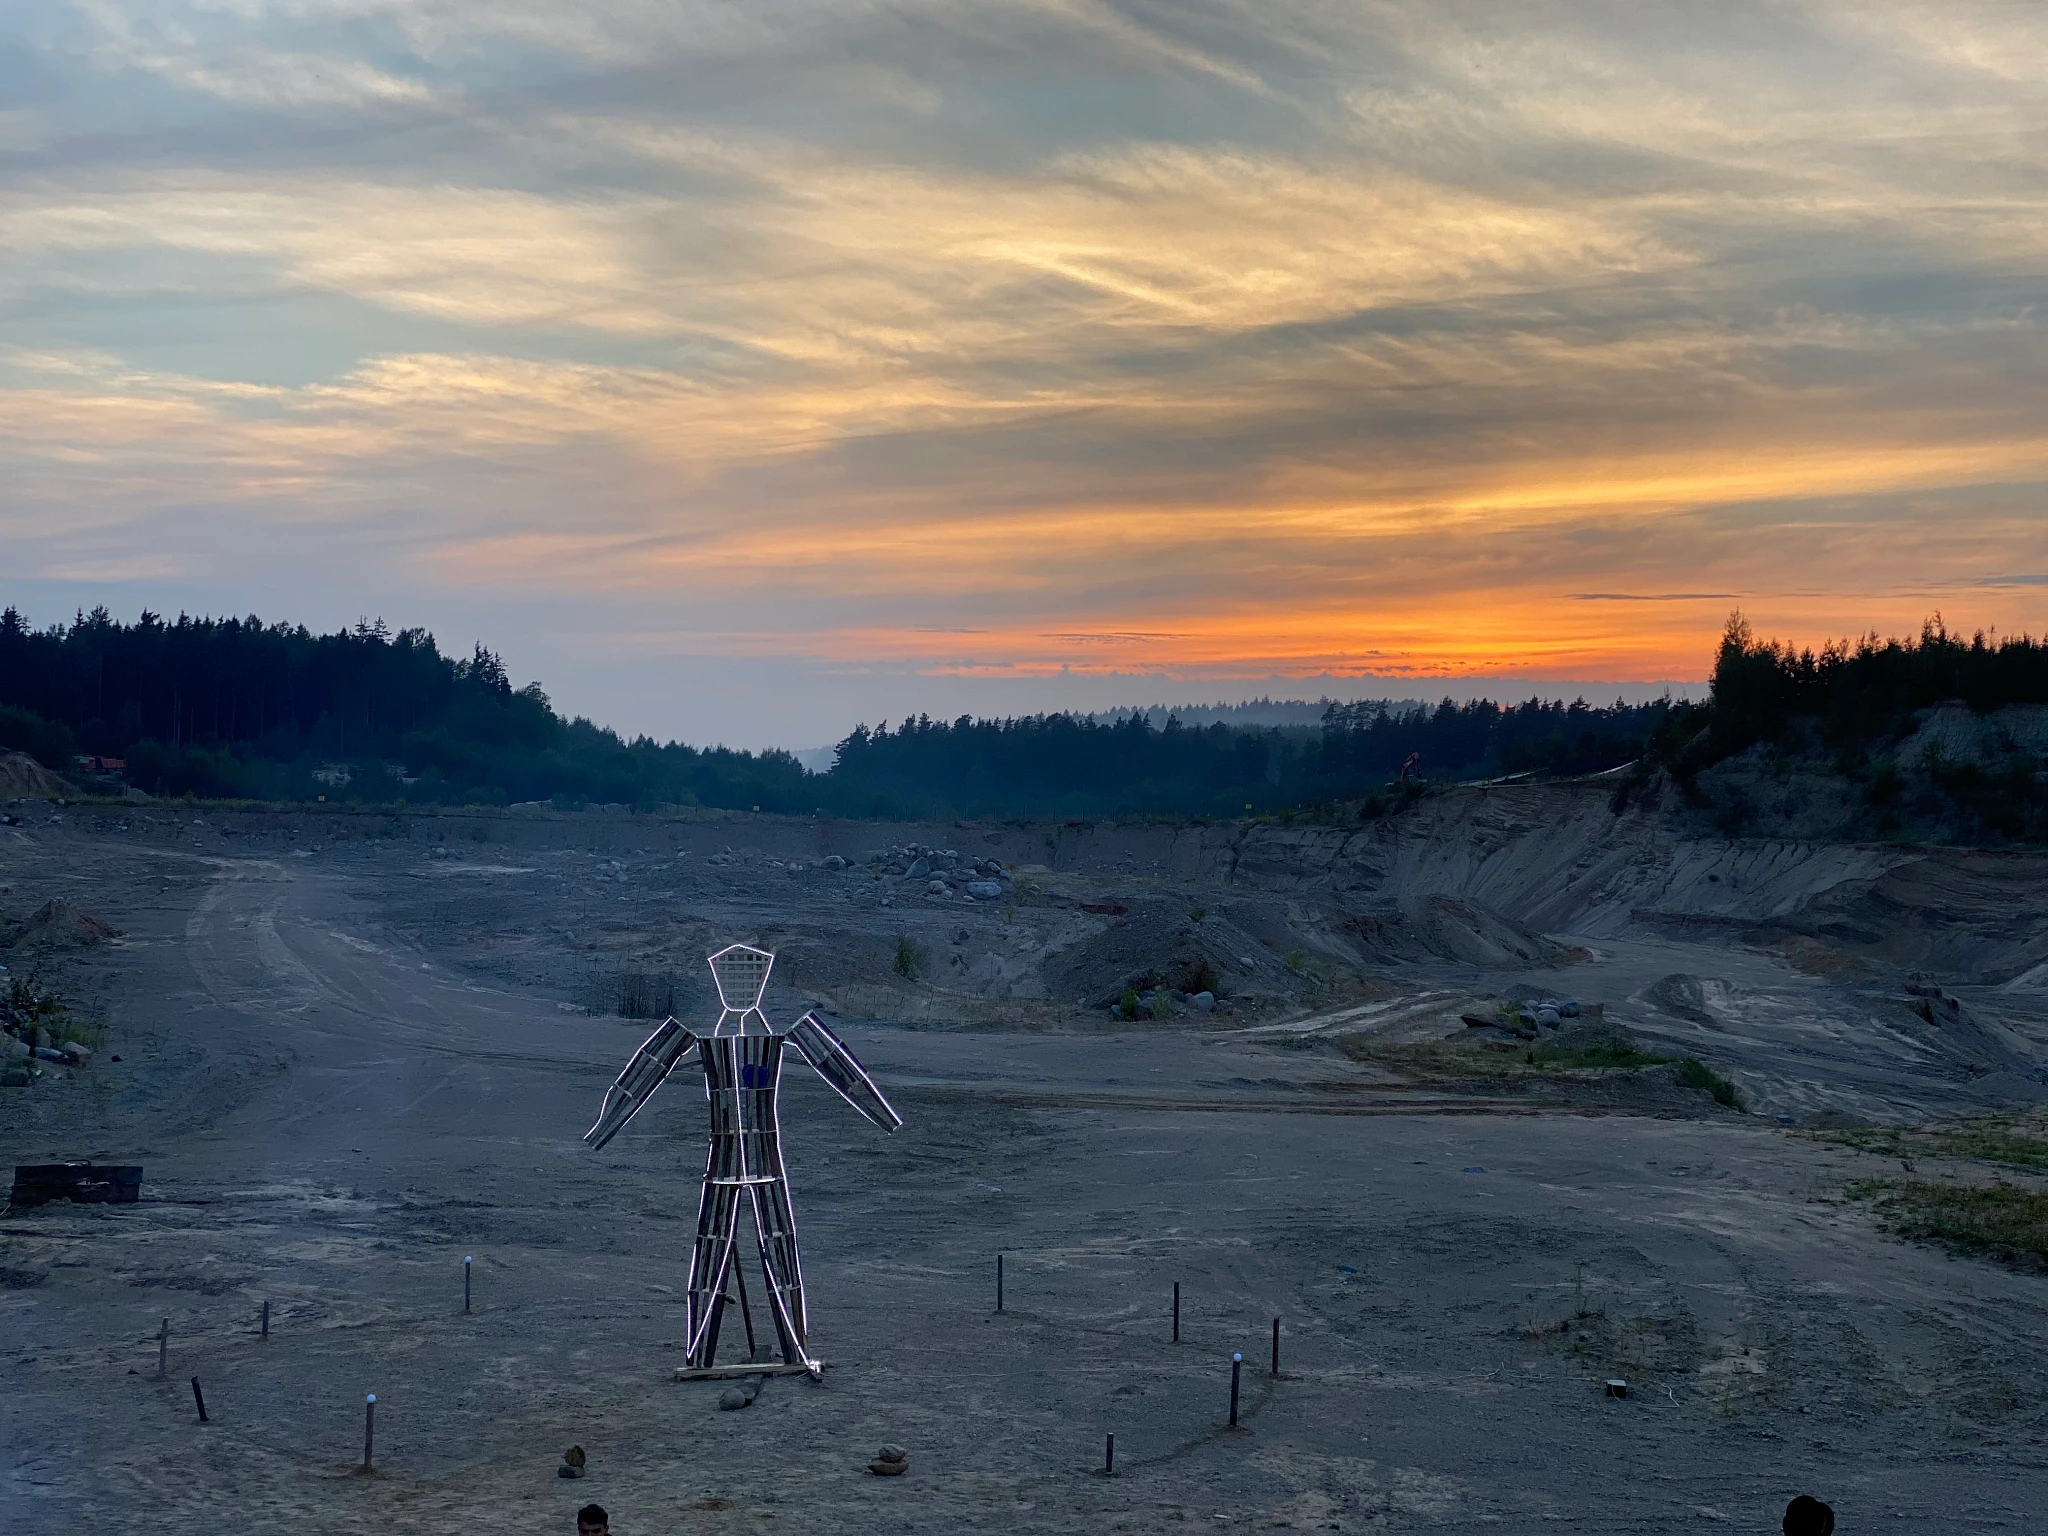 A wooden statue of a humanoid figure adorned with LED lights stands against a barren background with a beautiful orange sunset